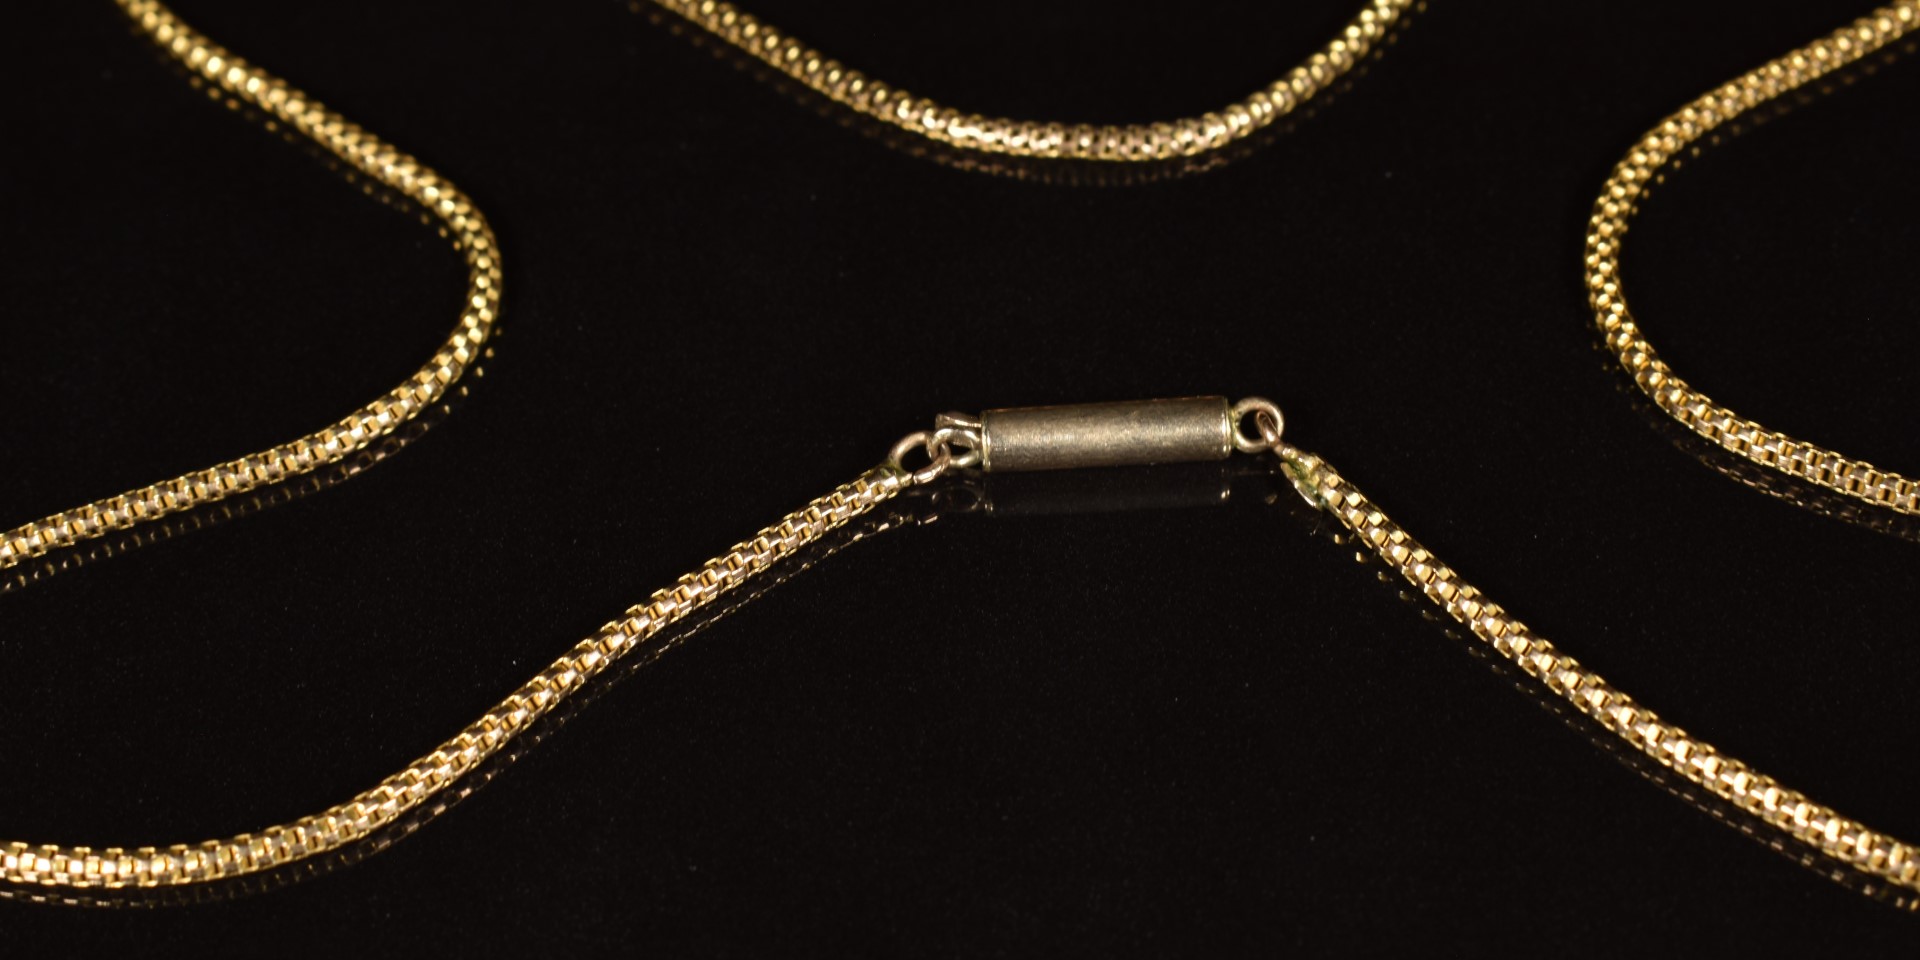 A c1915 9ct gold chain with barrel clasp, length 43cm, 3.9g - Image 3 of 3